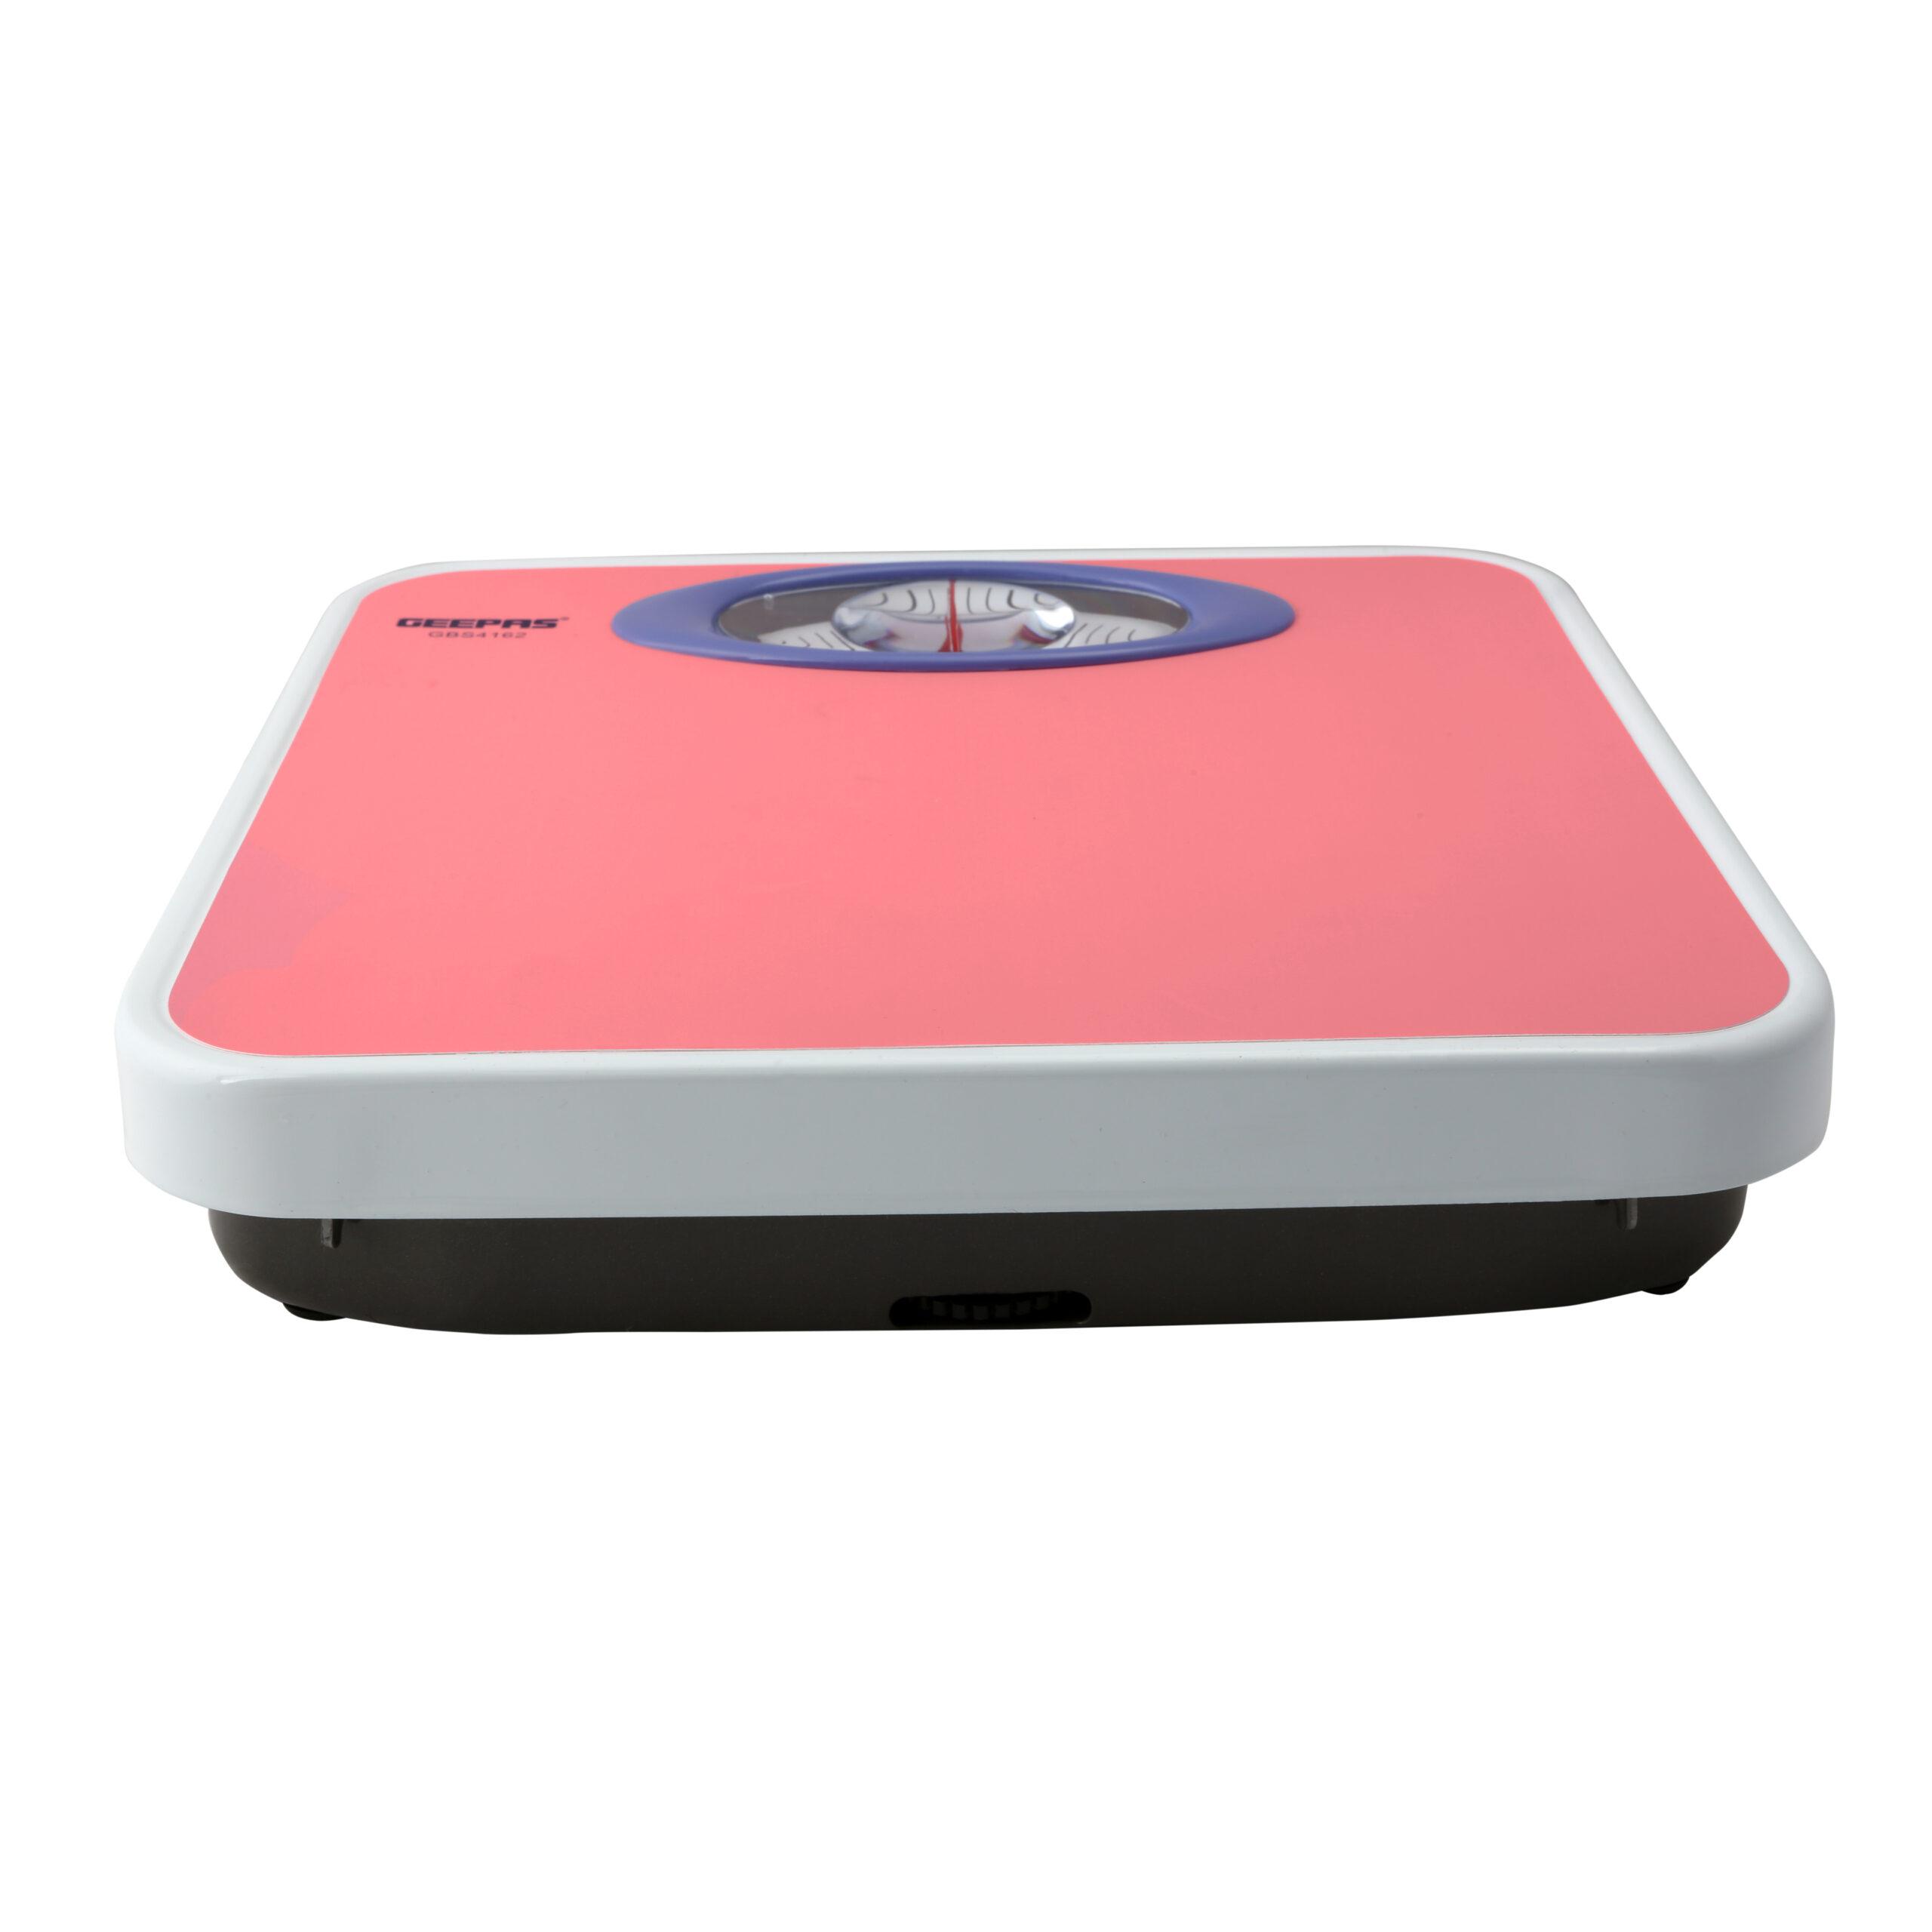 Geepas Weighing Scale - Analogue Manual Mechanical Weighting Machine for Body weight machine - 125Kg Capacity - Bathroom Scale, Large Rotating dial for Accuracy